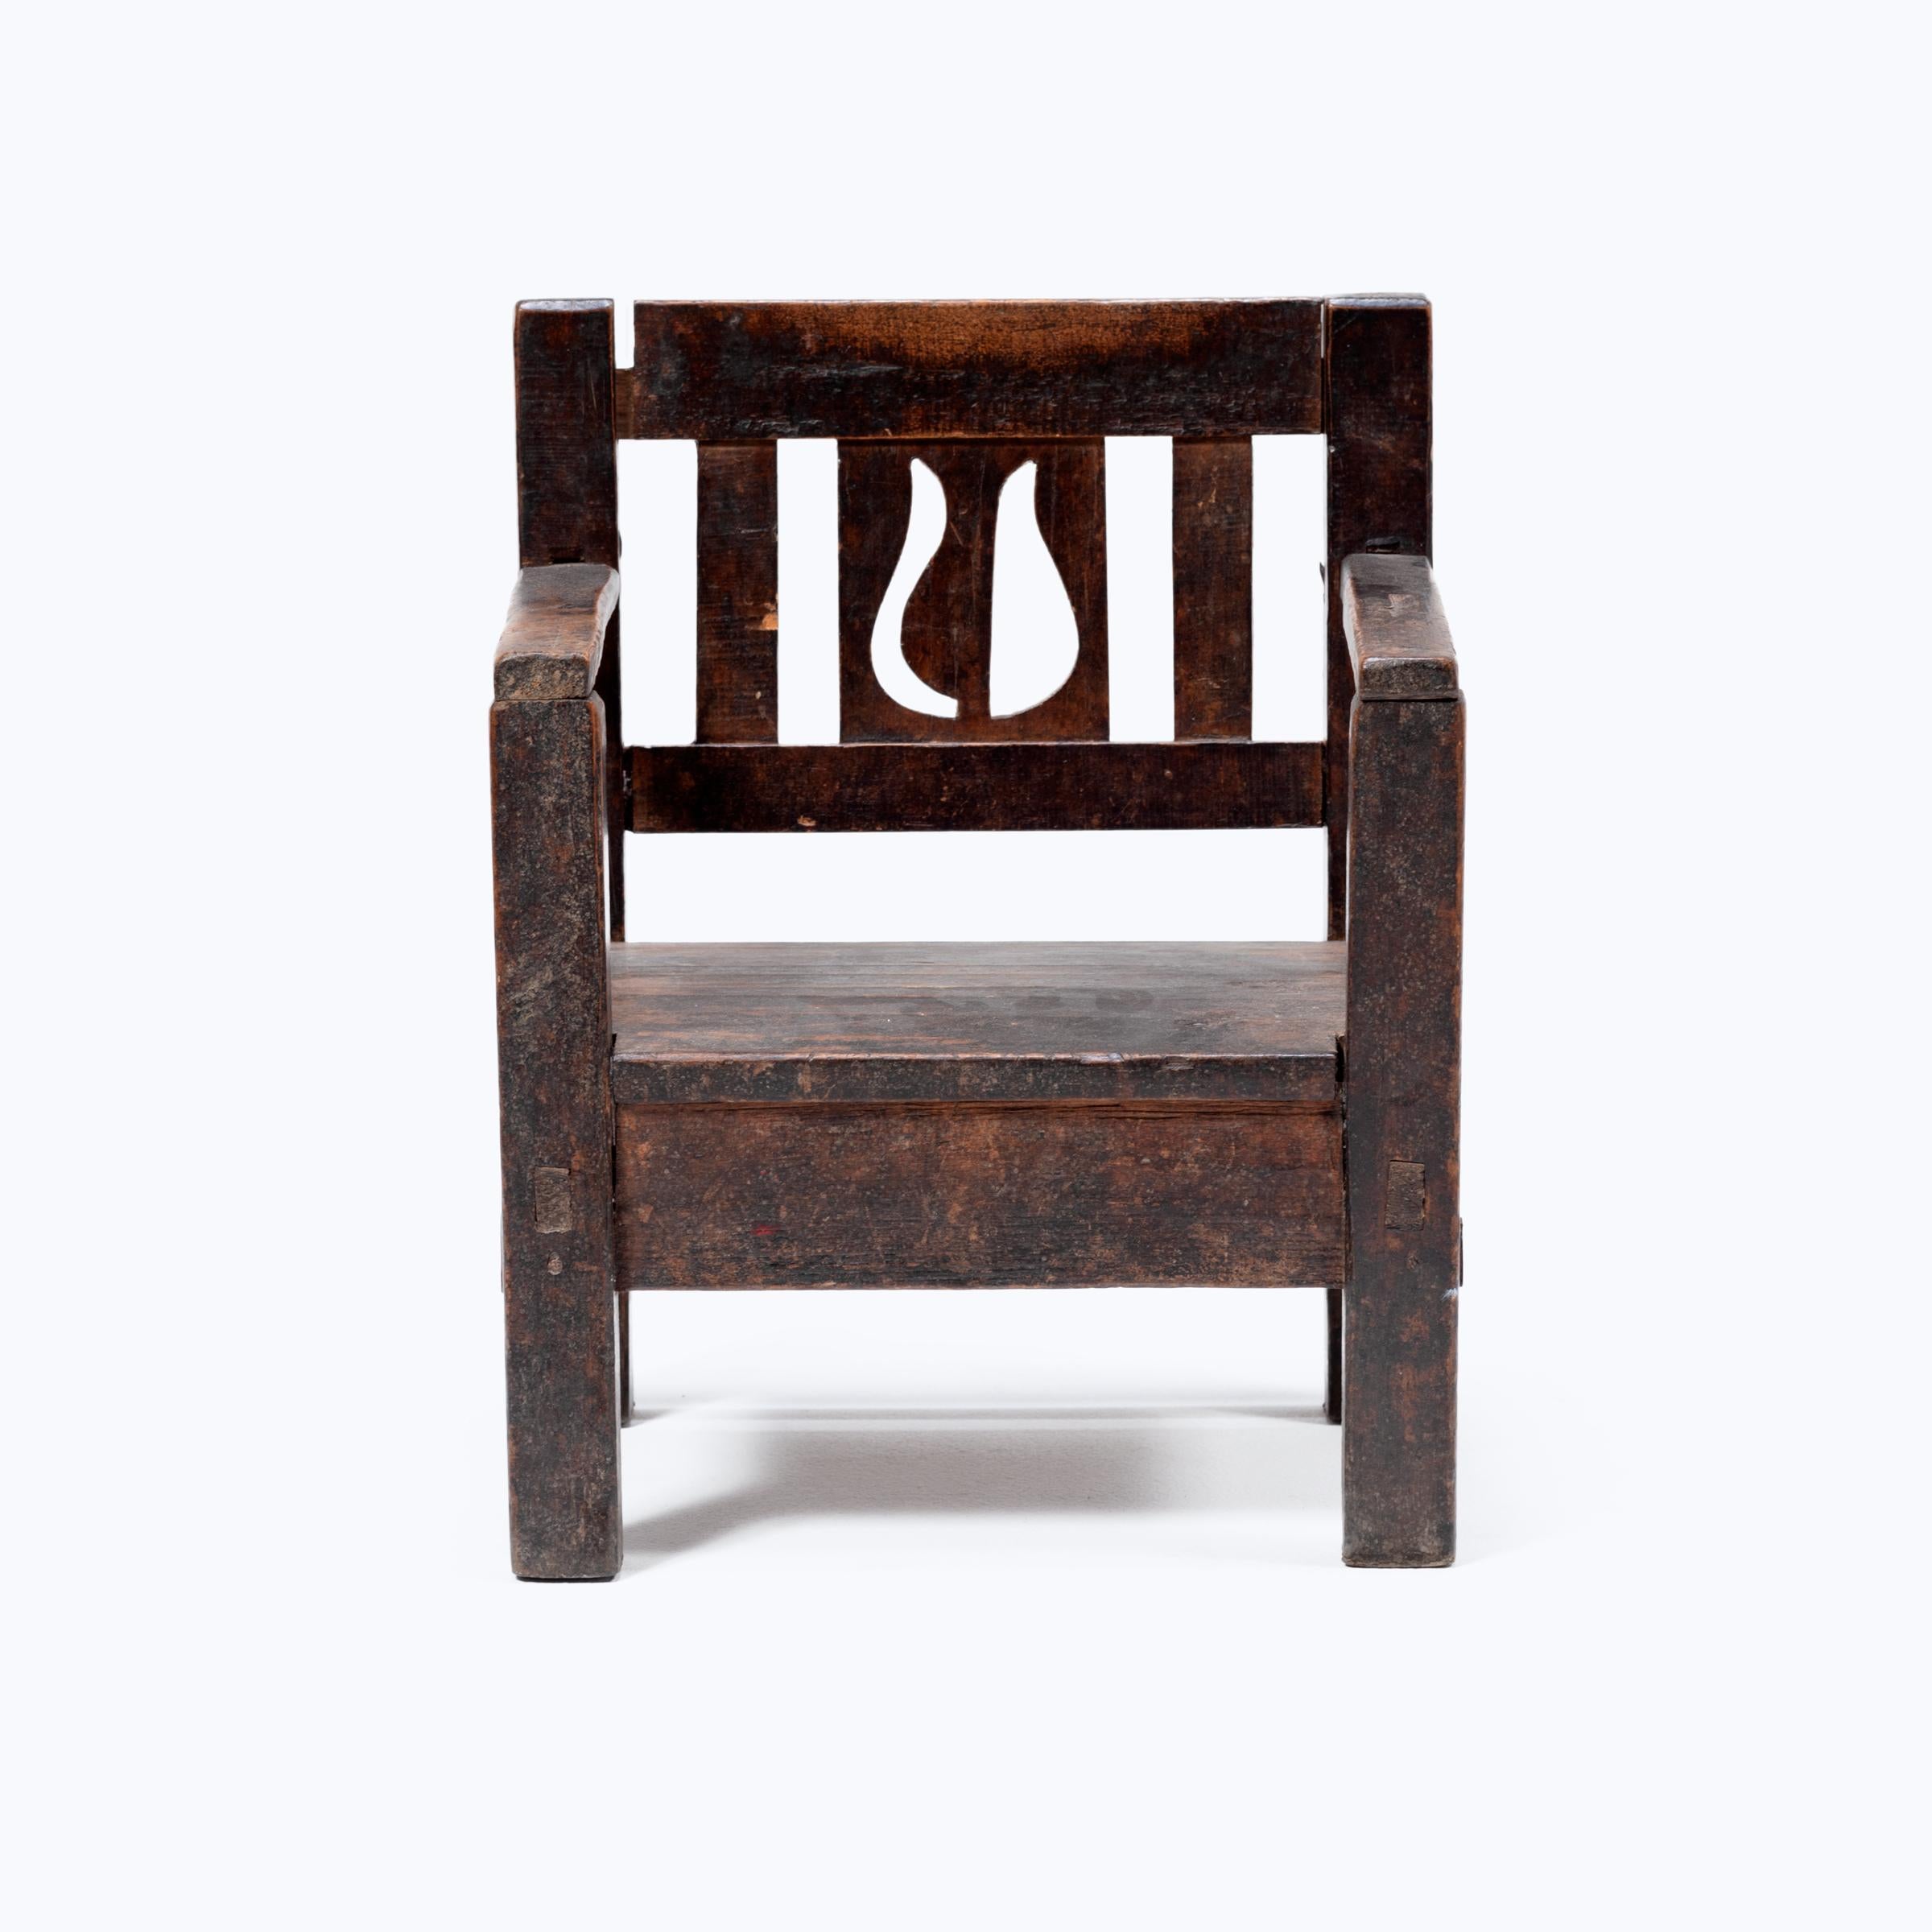 Crafted in the early 20th century, this petite Guatemalan children's chair charms with its playful asymmetry and richly textured surface. Influenced by Spanish Colonial furniture design, the chair has a slatted back carved with an abstract flower